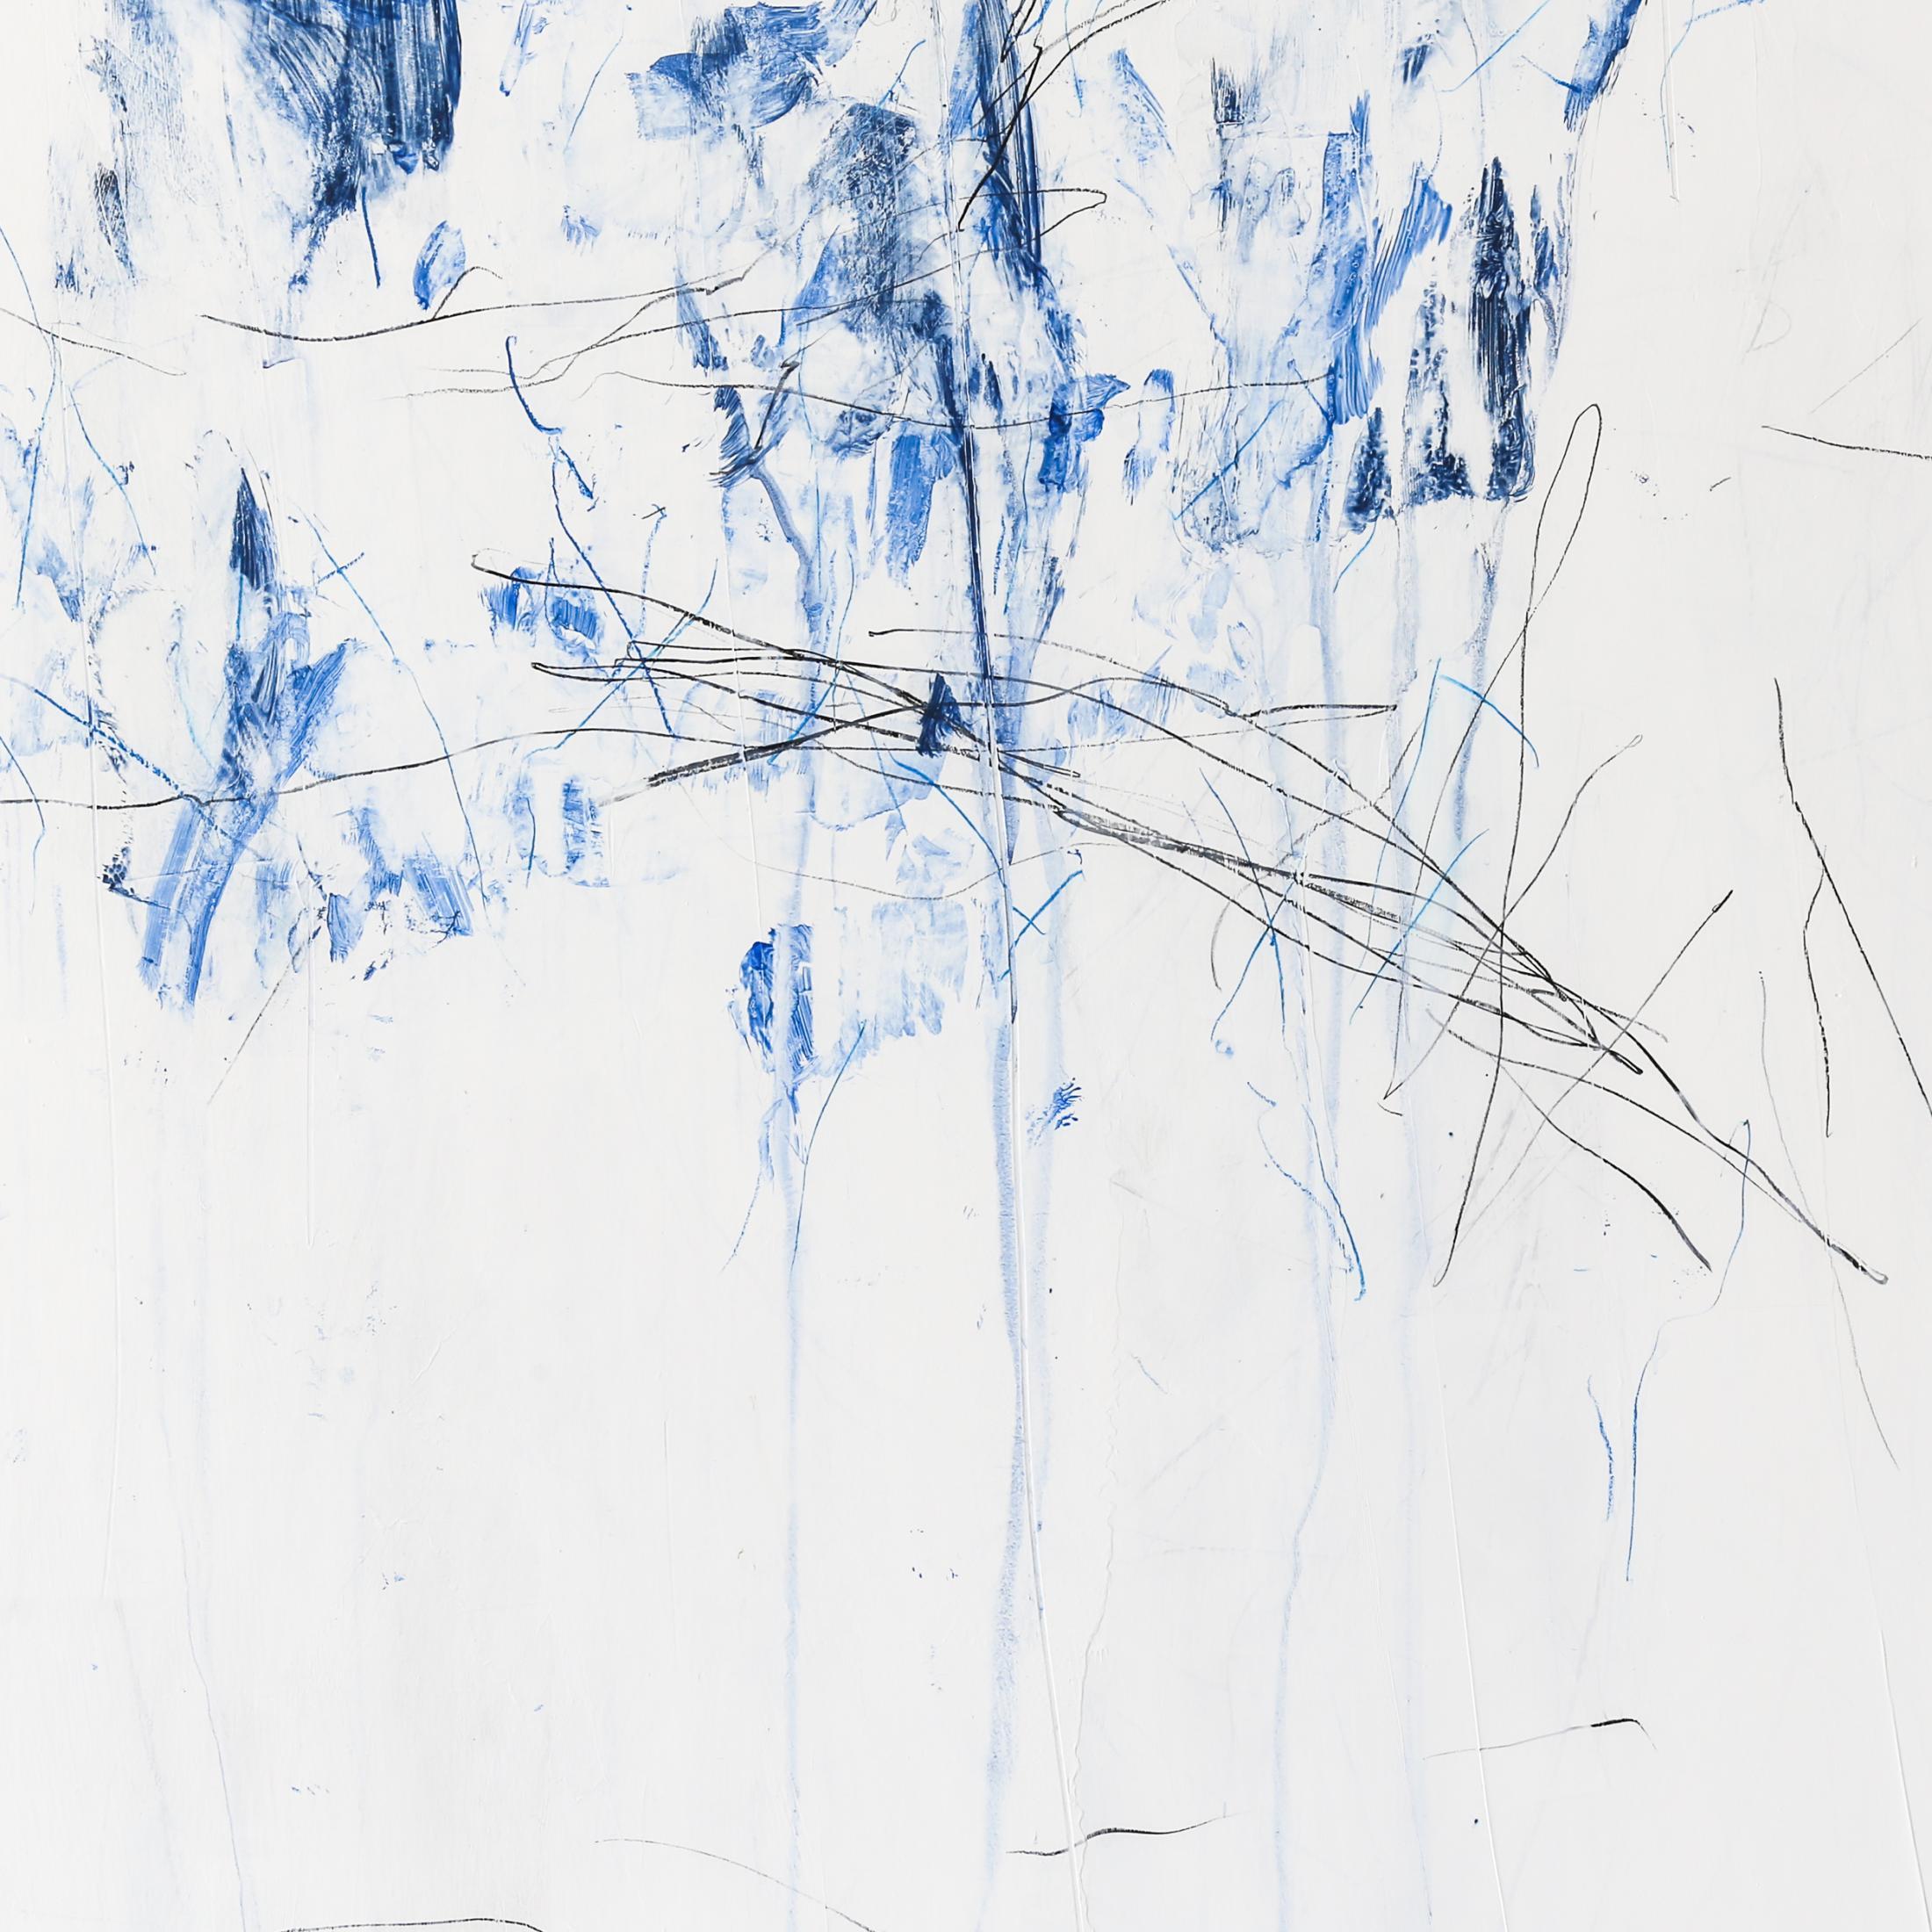 PATTI PARSONS
Briefly Scattered Blue (Grass)
• ink stick, china marker, acrylic paint on wood panel
30.00w x 30.00h x 2.00d in
$4,500.00From the perspective of a writer and a painter, Patti finds the intrigue of tangles and the appearance of chaos